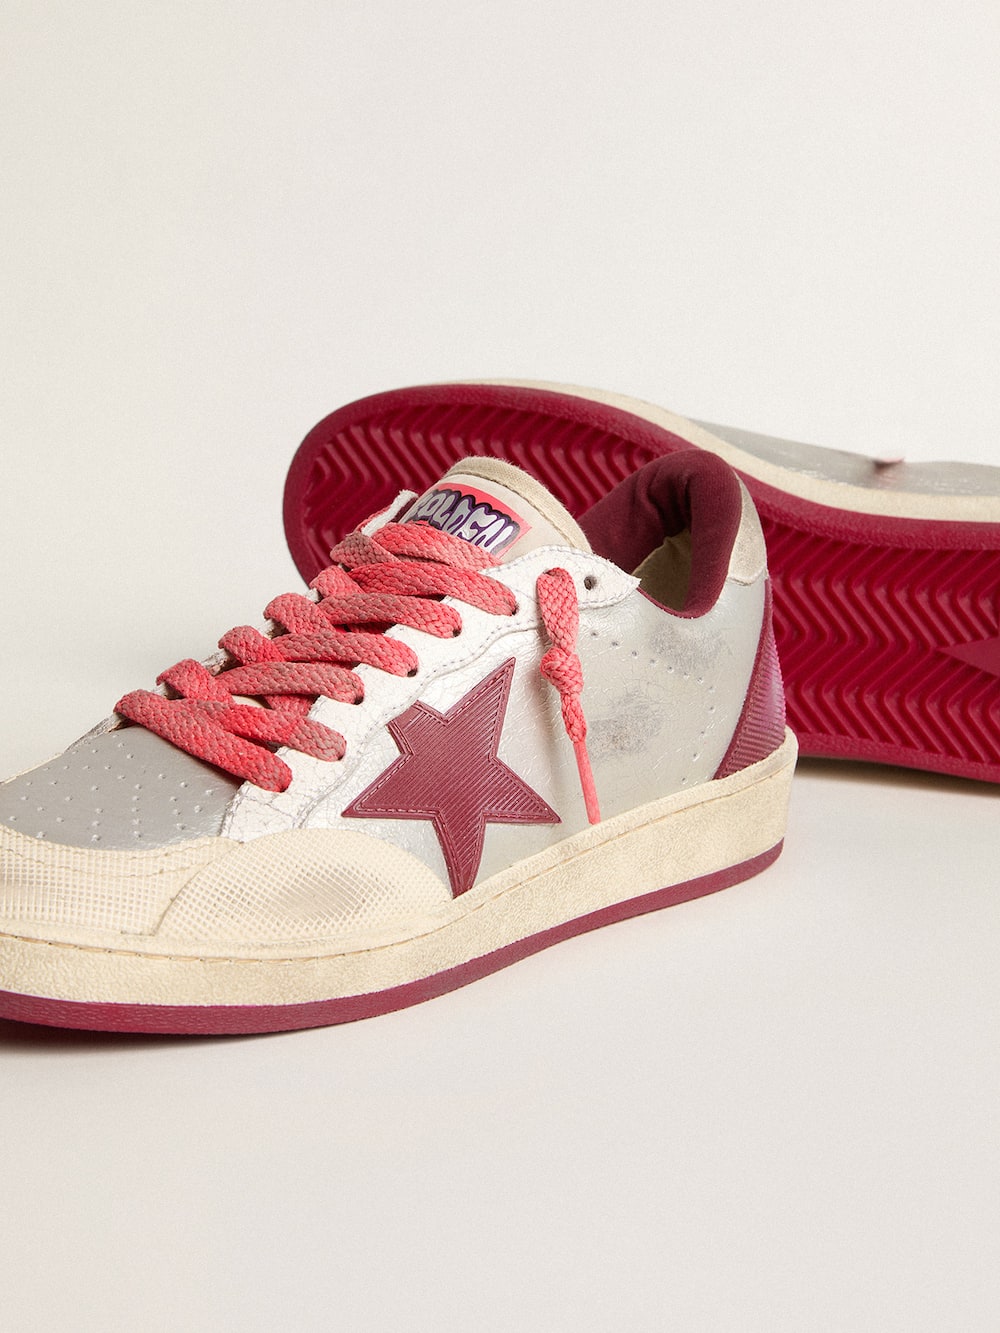 Golden Goose - Women’s Ball Star Pro in silver crackle leather with burgundy star in 